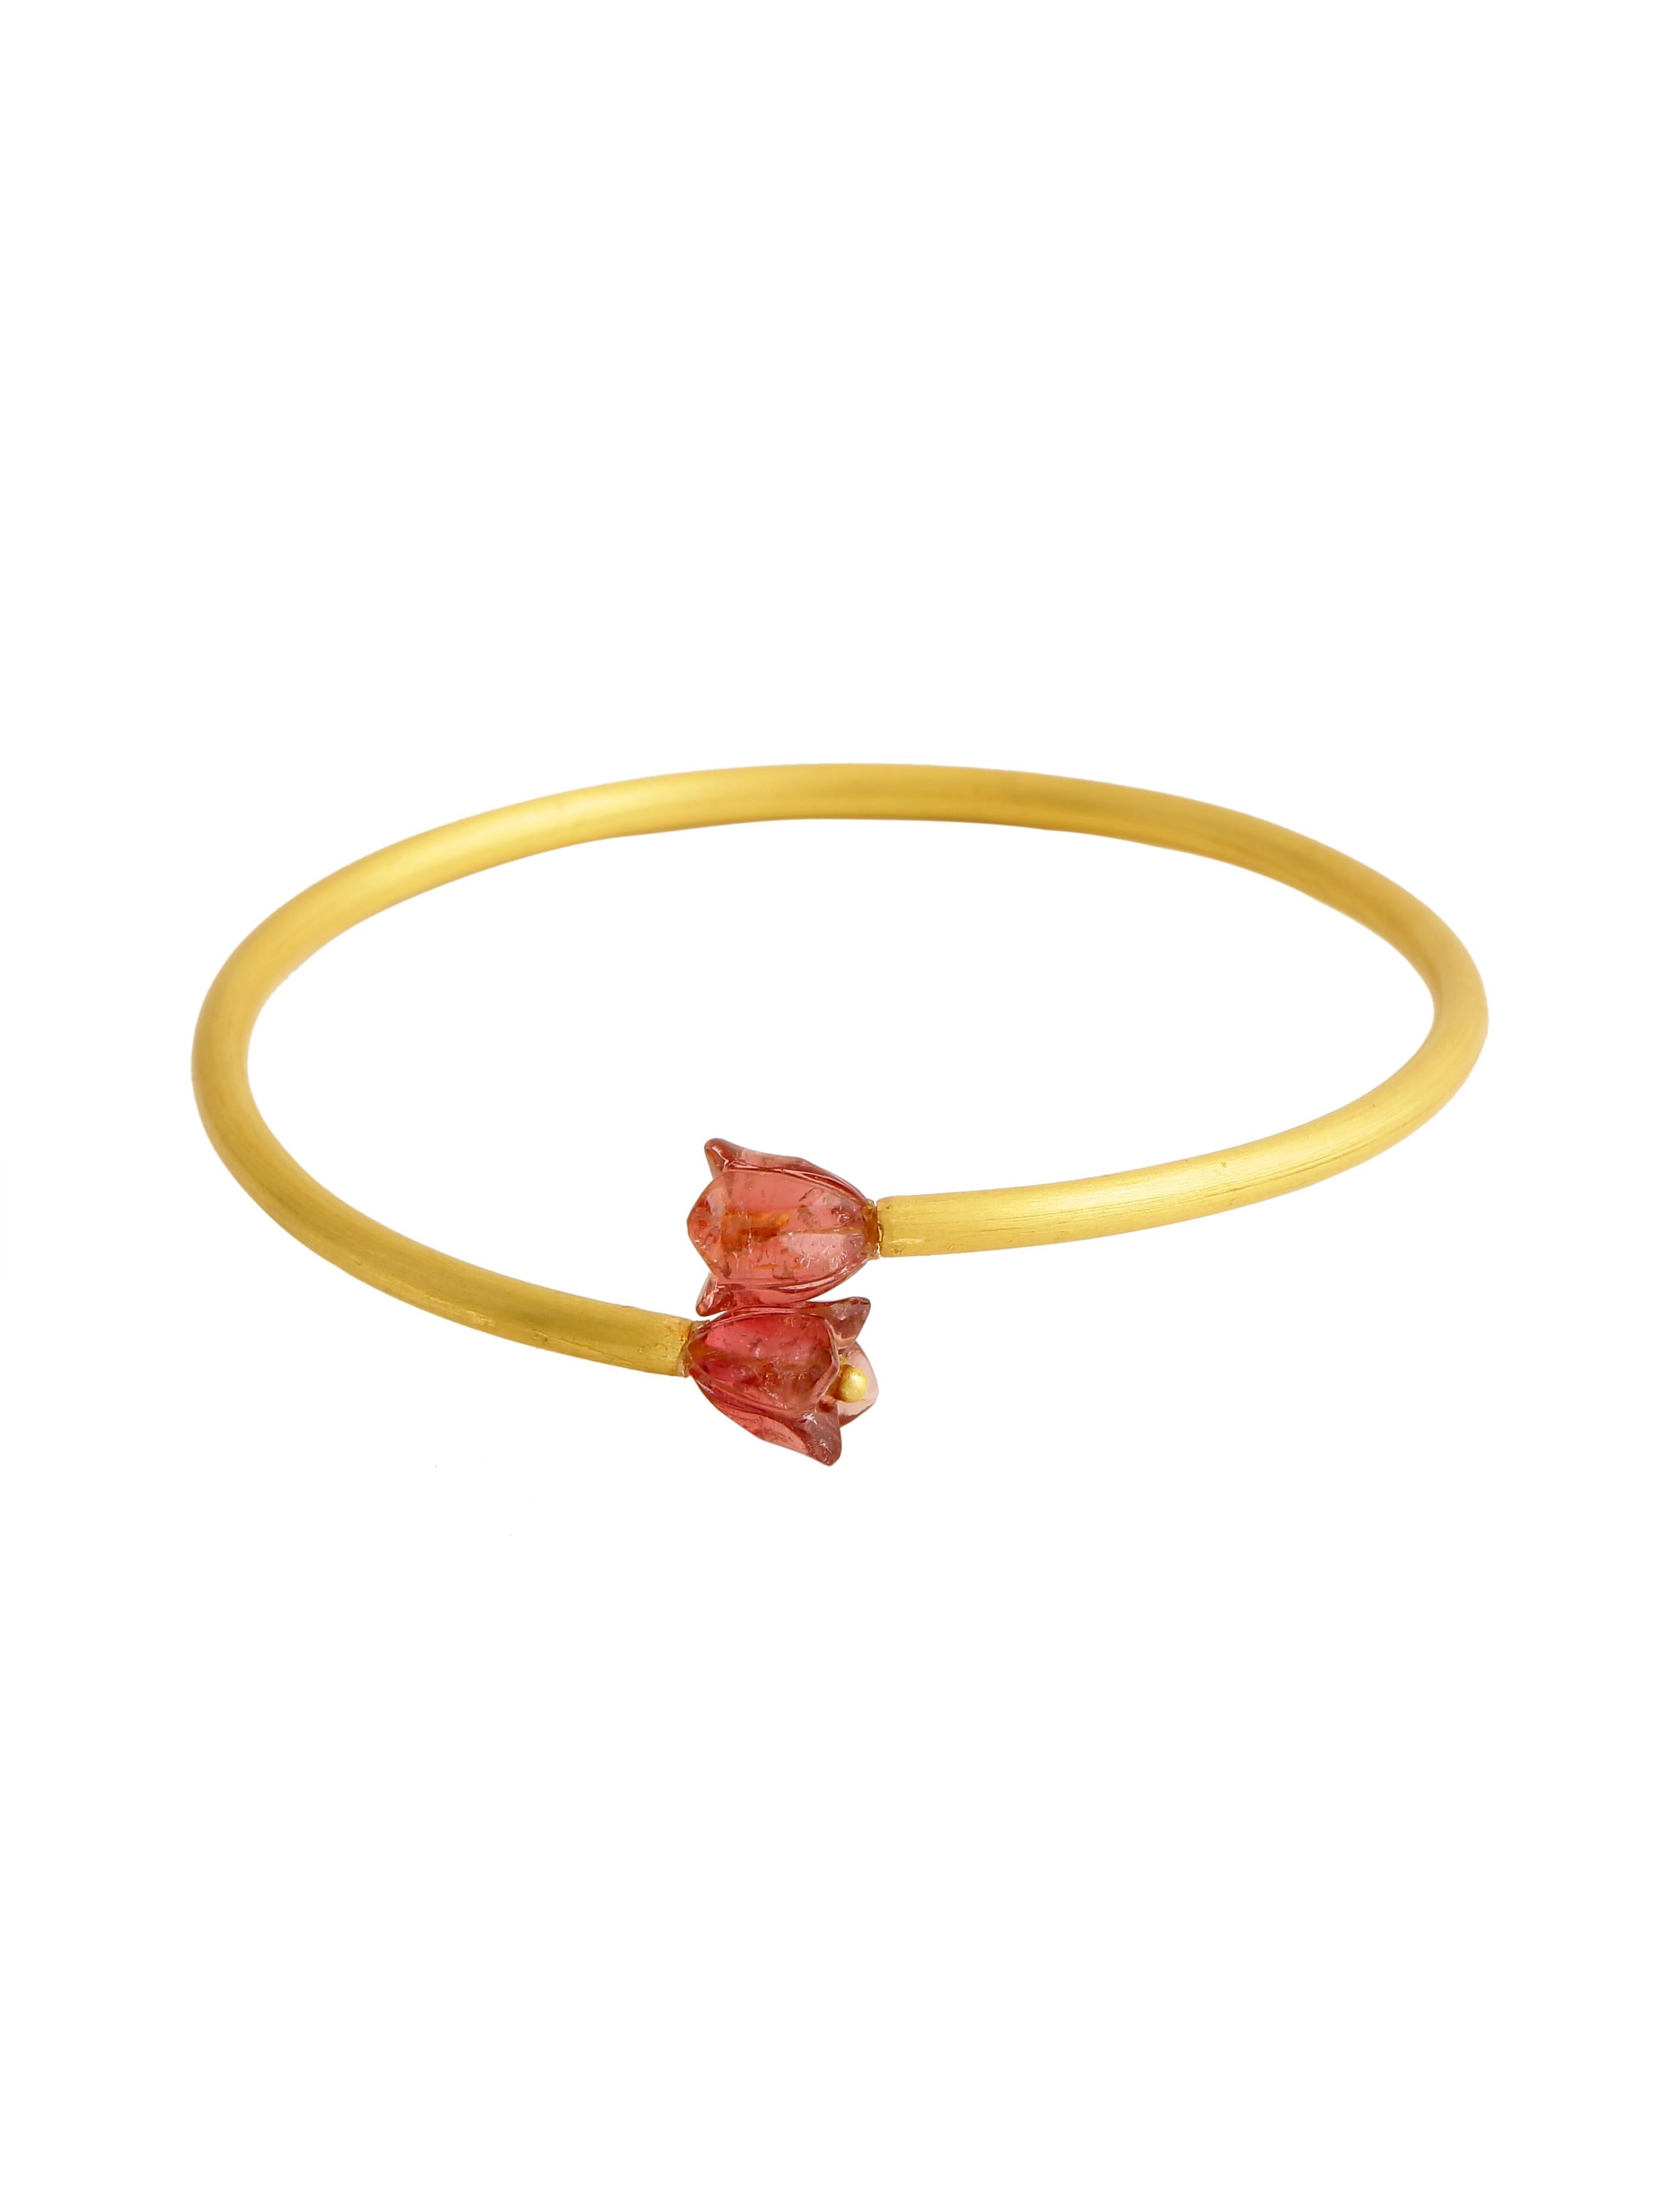 A beautiful bangle handcrafted in 22 karat gold with a nice pair of tourmaline hand carved flower on both the ends.
The bangle fits and sits well on mostly all wrist sizes. Matte finish gold gives it a very unique look. Perfect as a part of your